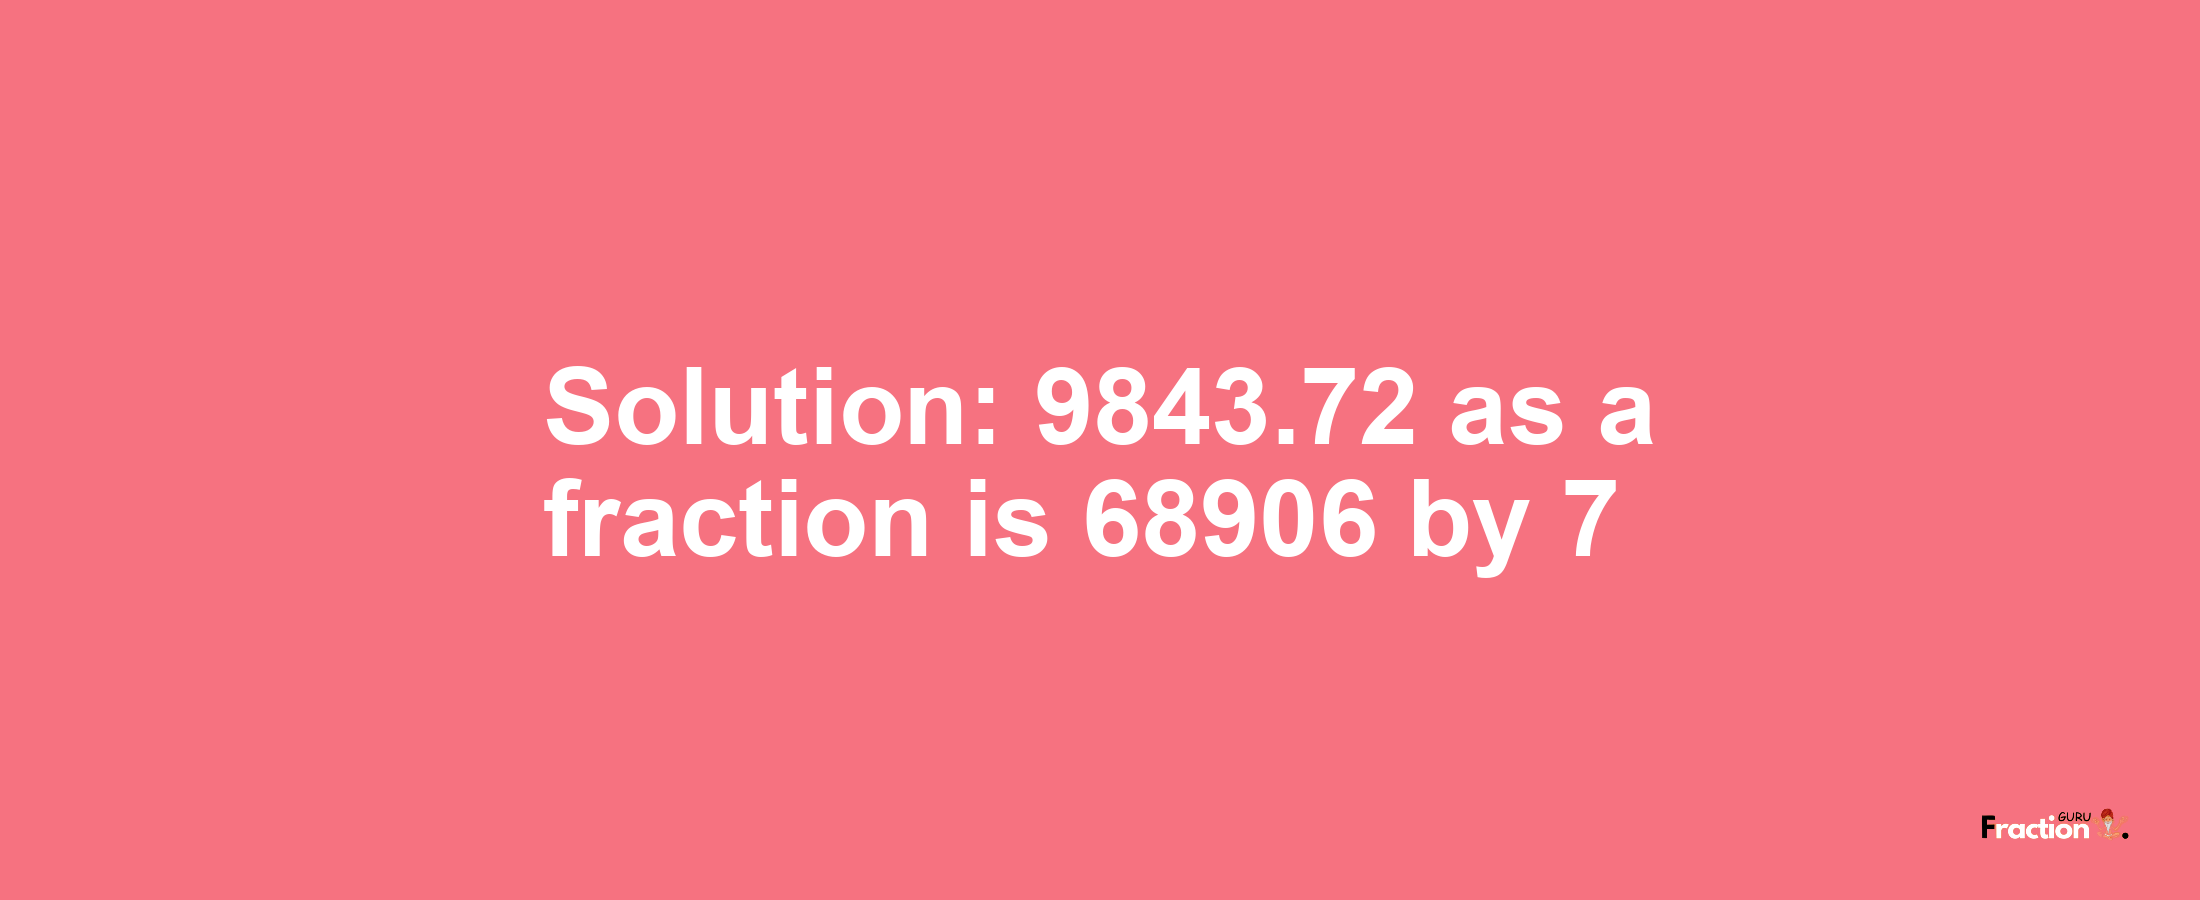 Solution:9843.72 as a fraction is 68906/7